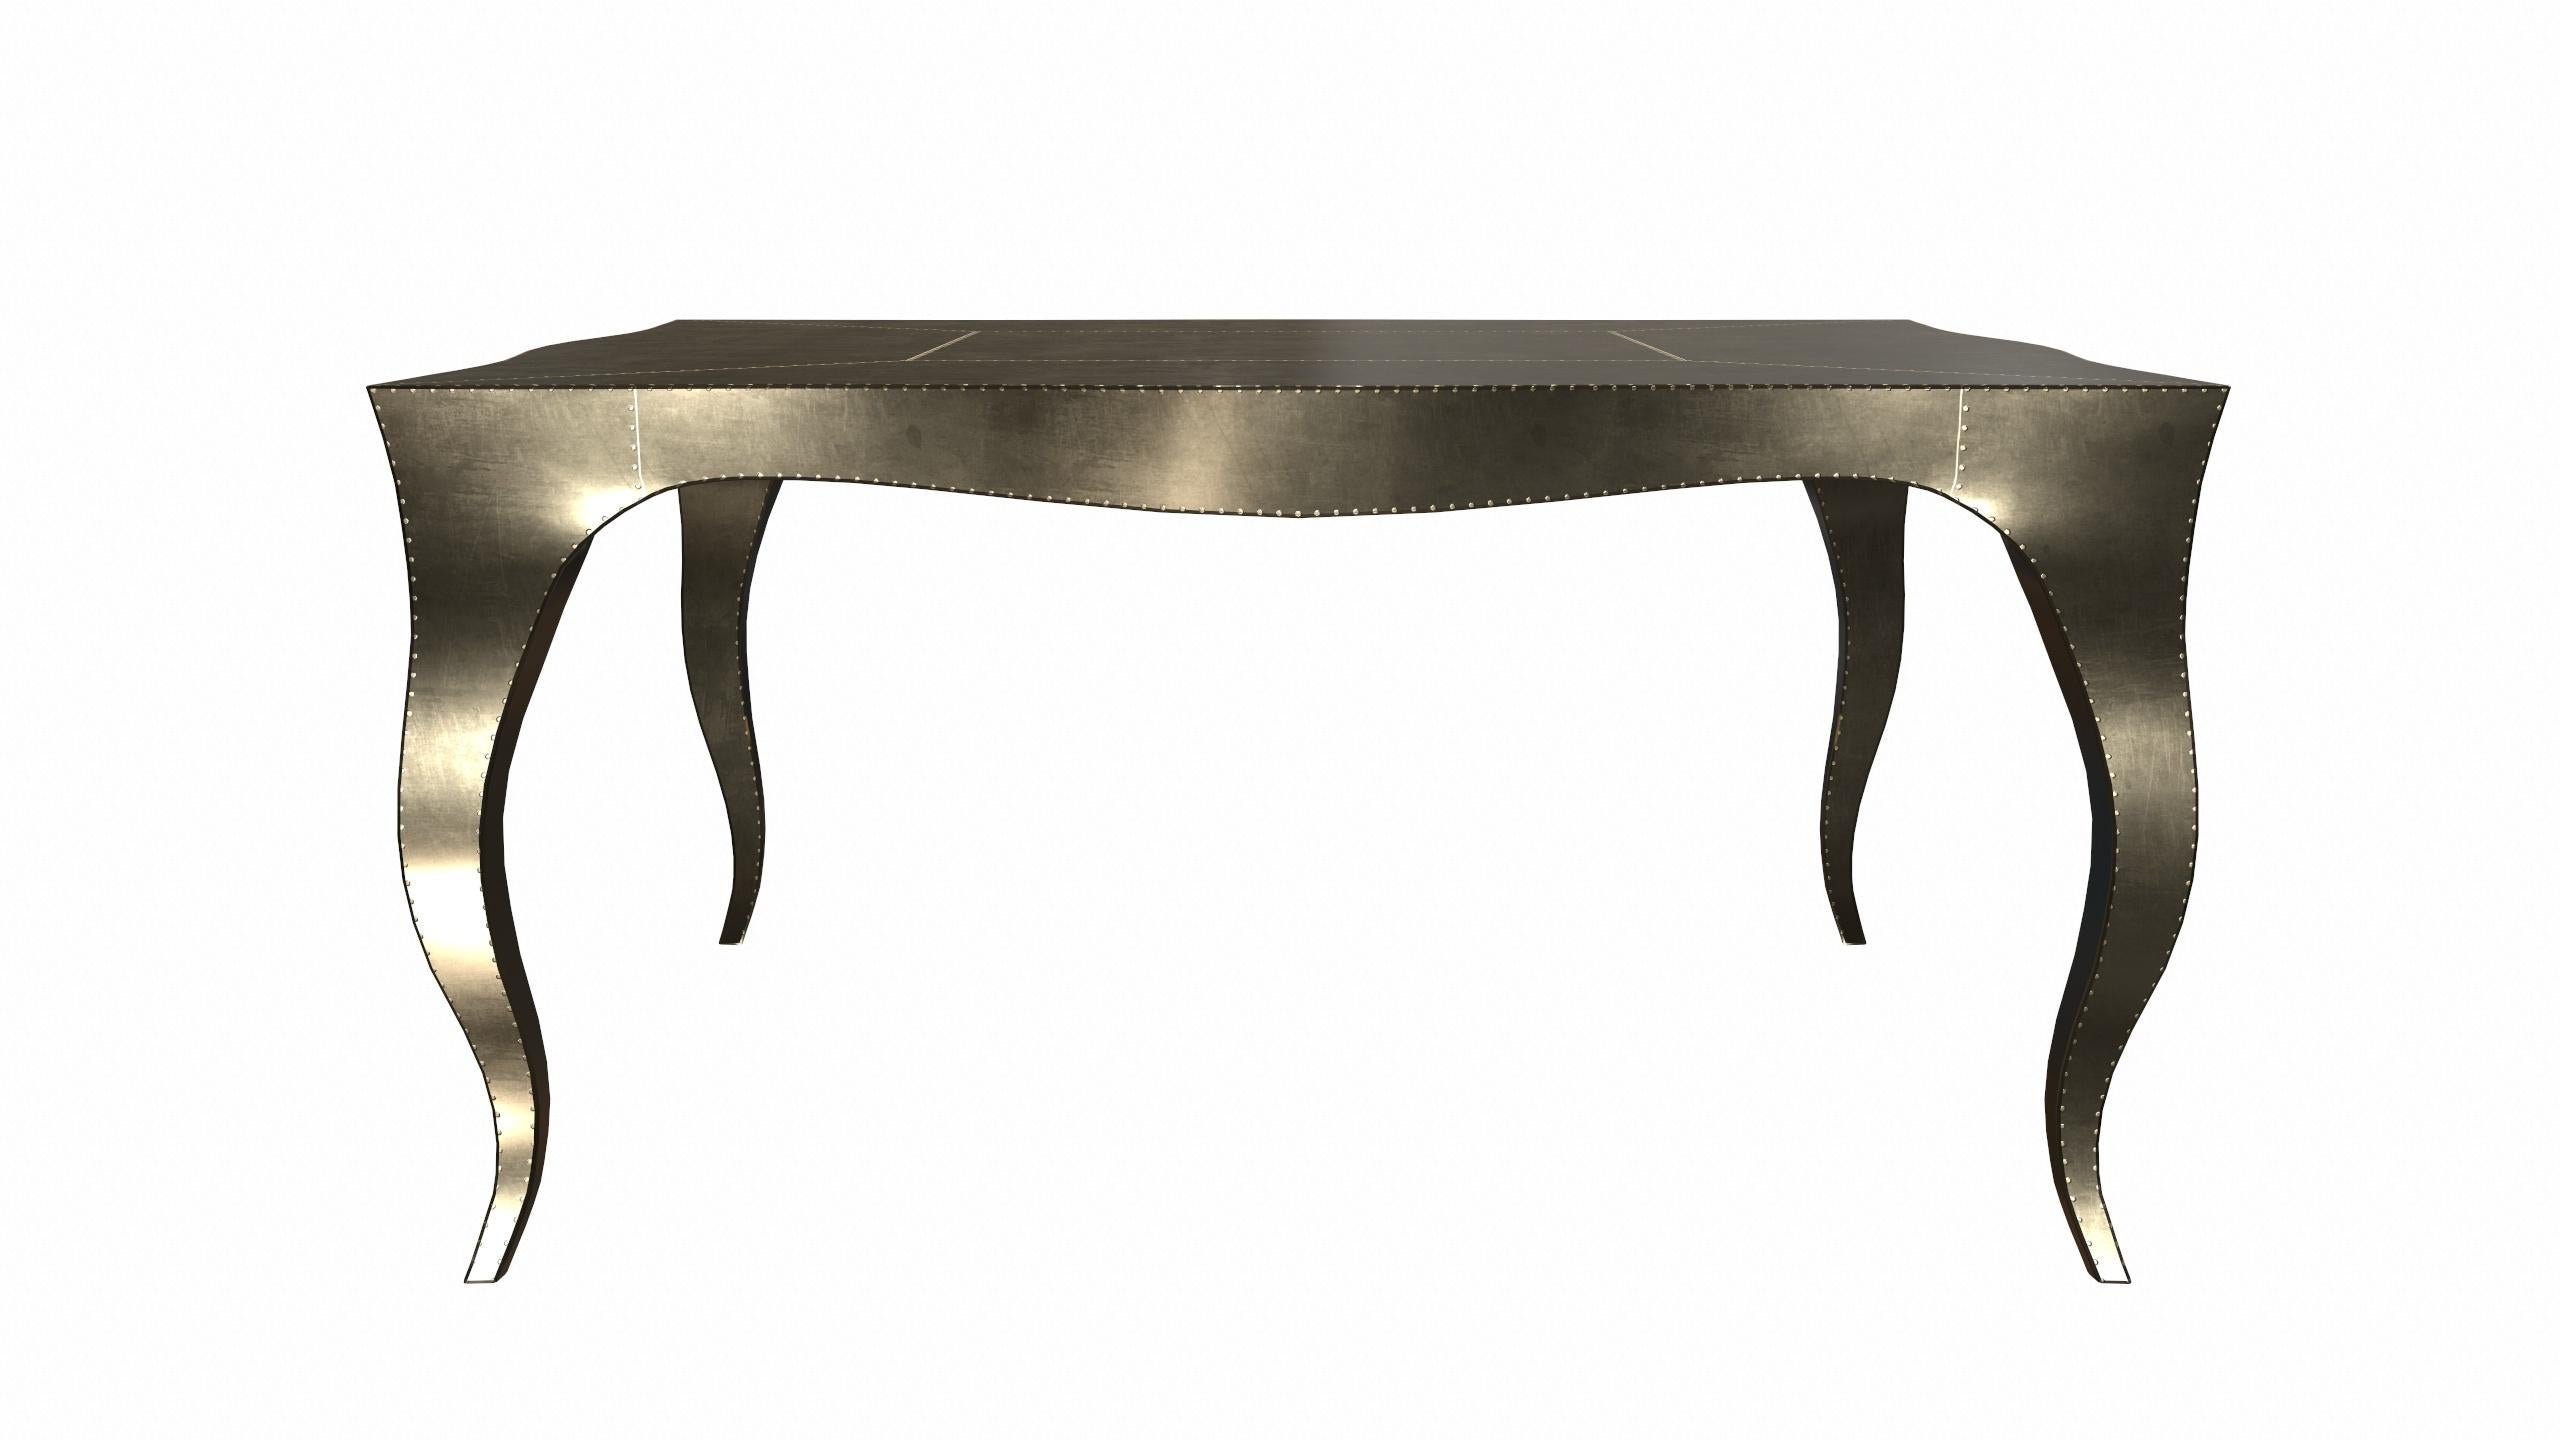 Woodwork Louise Art Deco Center Tables Smooth Brass by Paul Mathieu S.Odegard For Sale